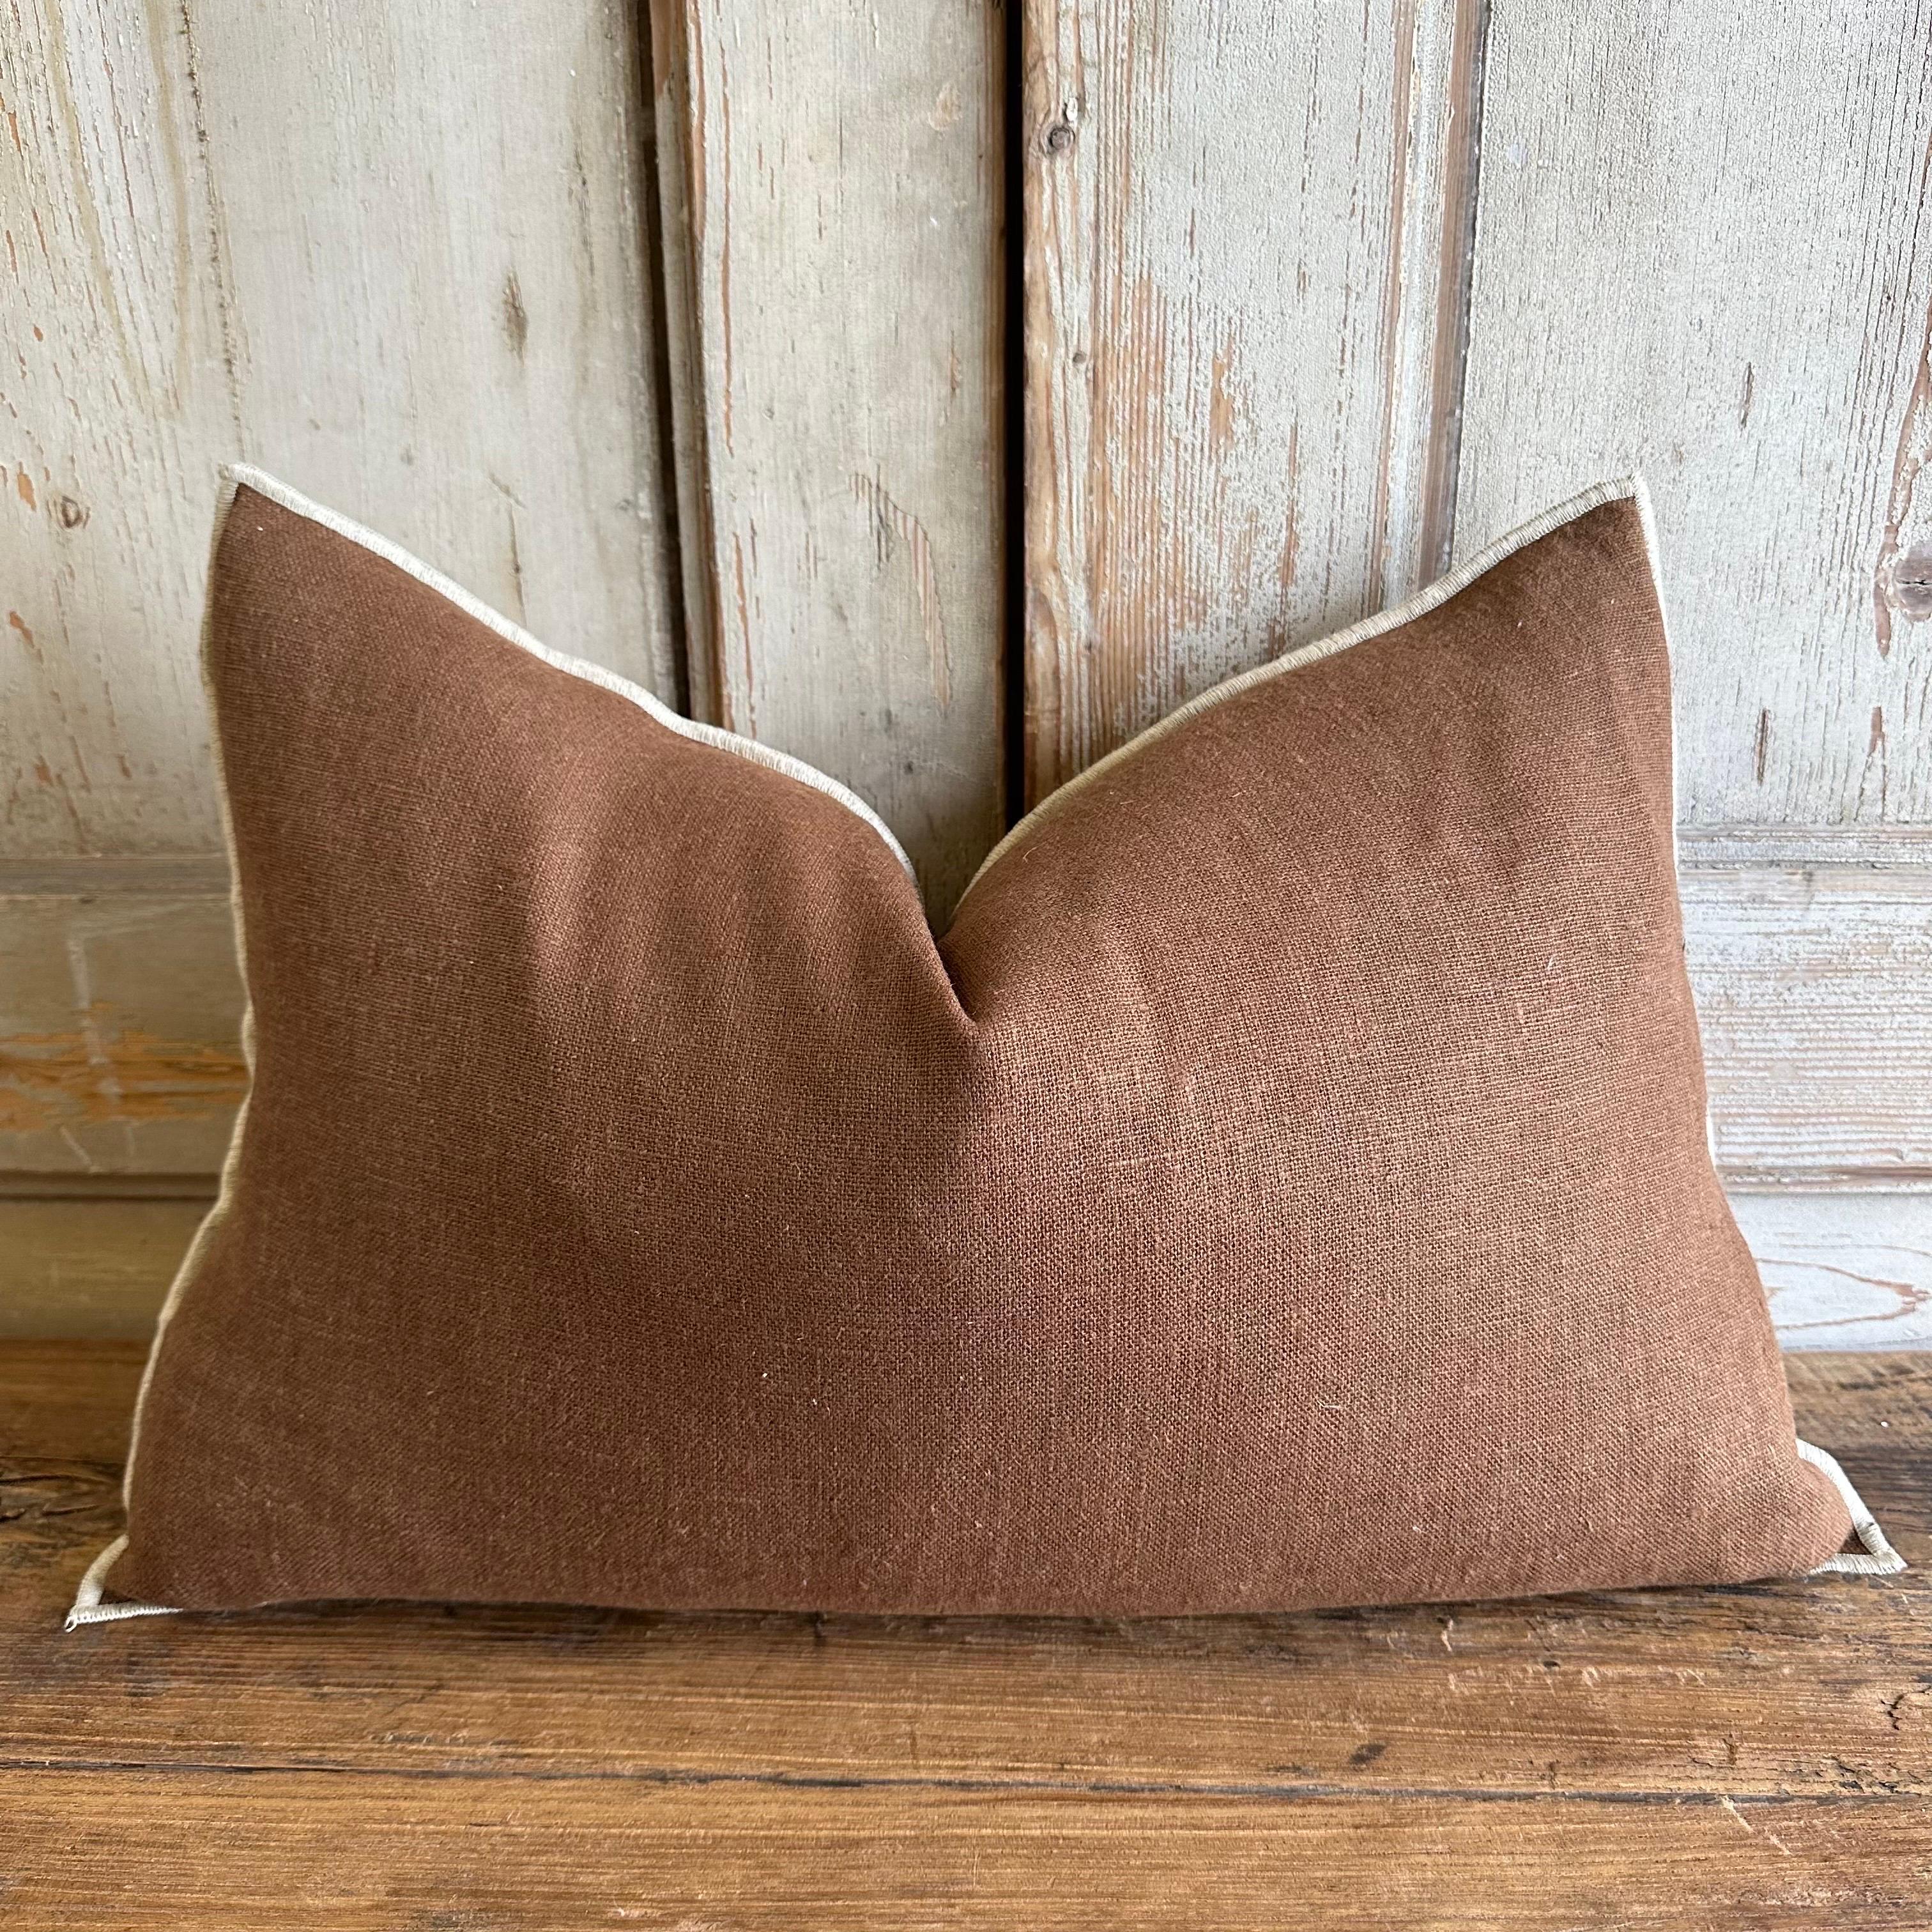 A Beautiful 100% linen pillow with decorative stitched edge. Zipper closure, 90/10 down feather pillow is included.
Size: 16x24
Color: Moka a rich chocolate brown with natural stitched edge
Composition
100% linen, natural finish, european flax